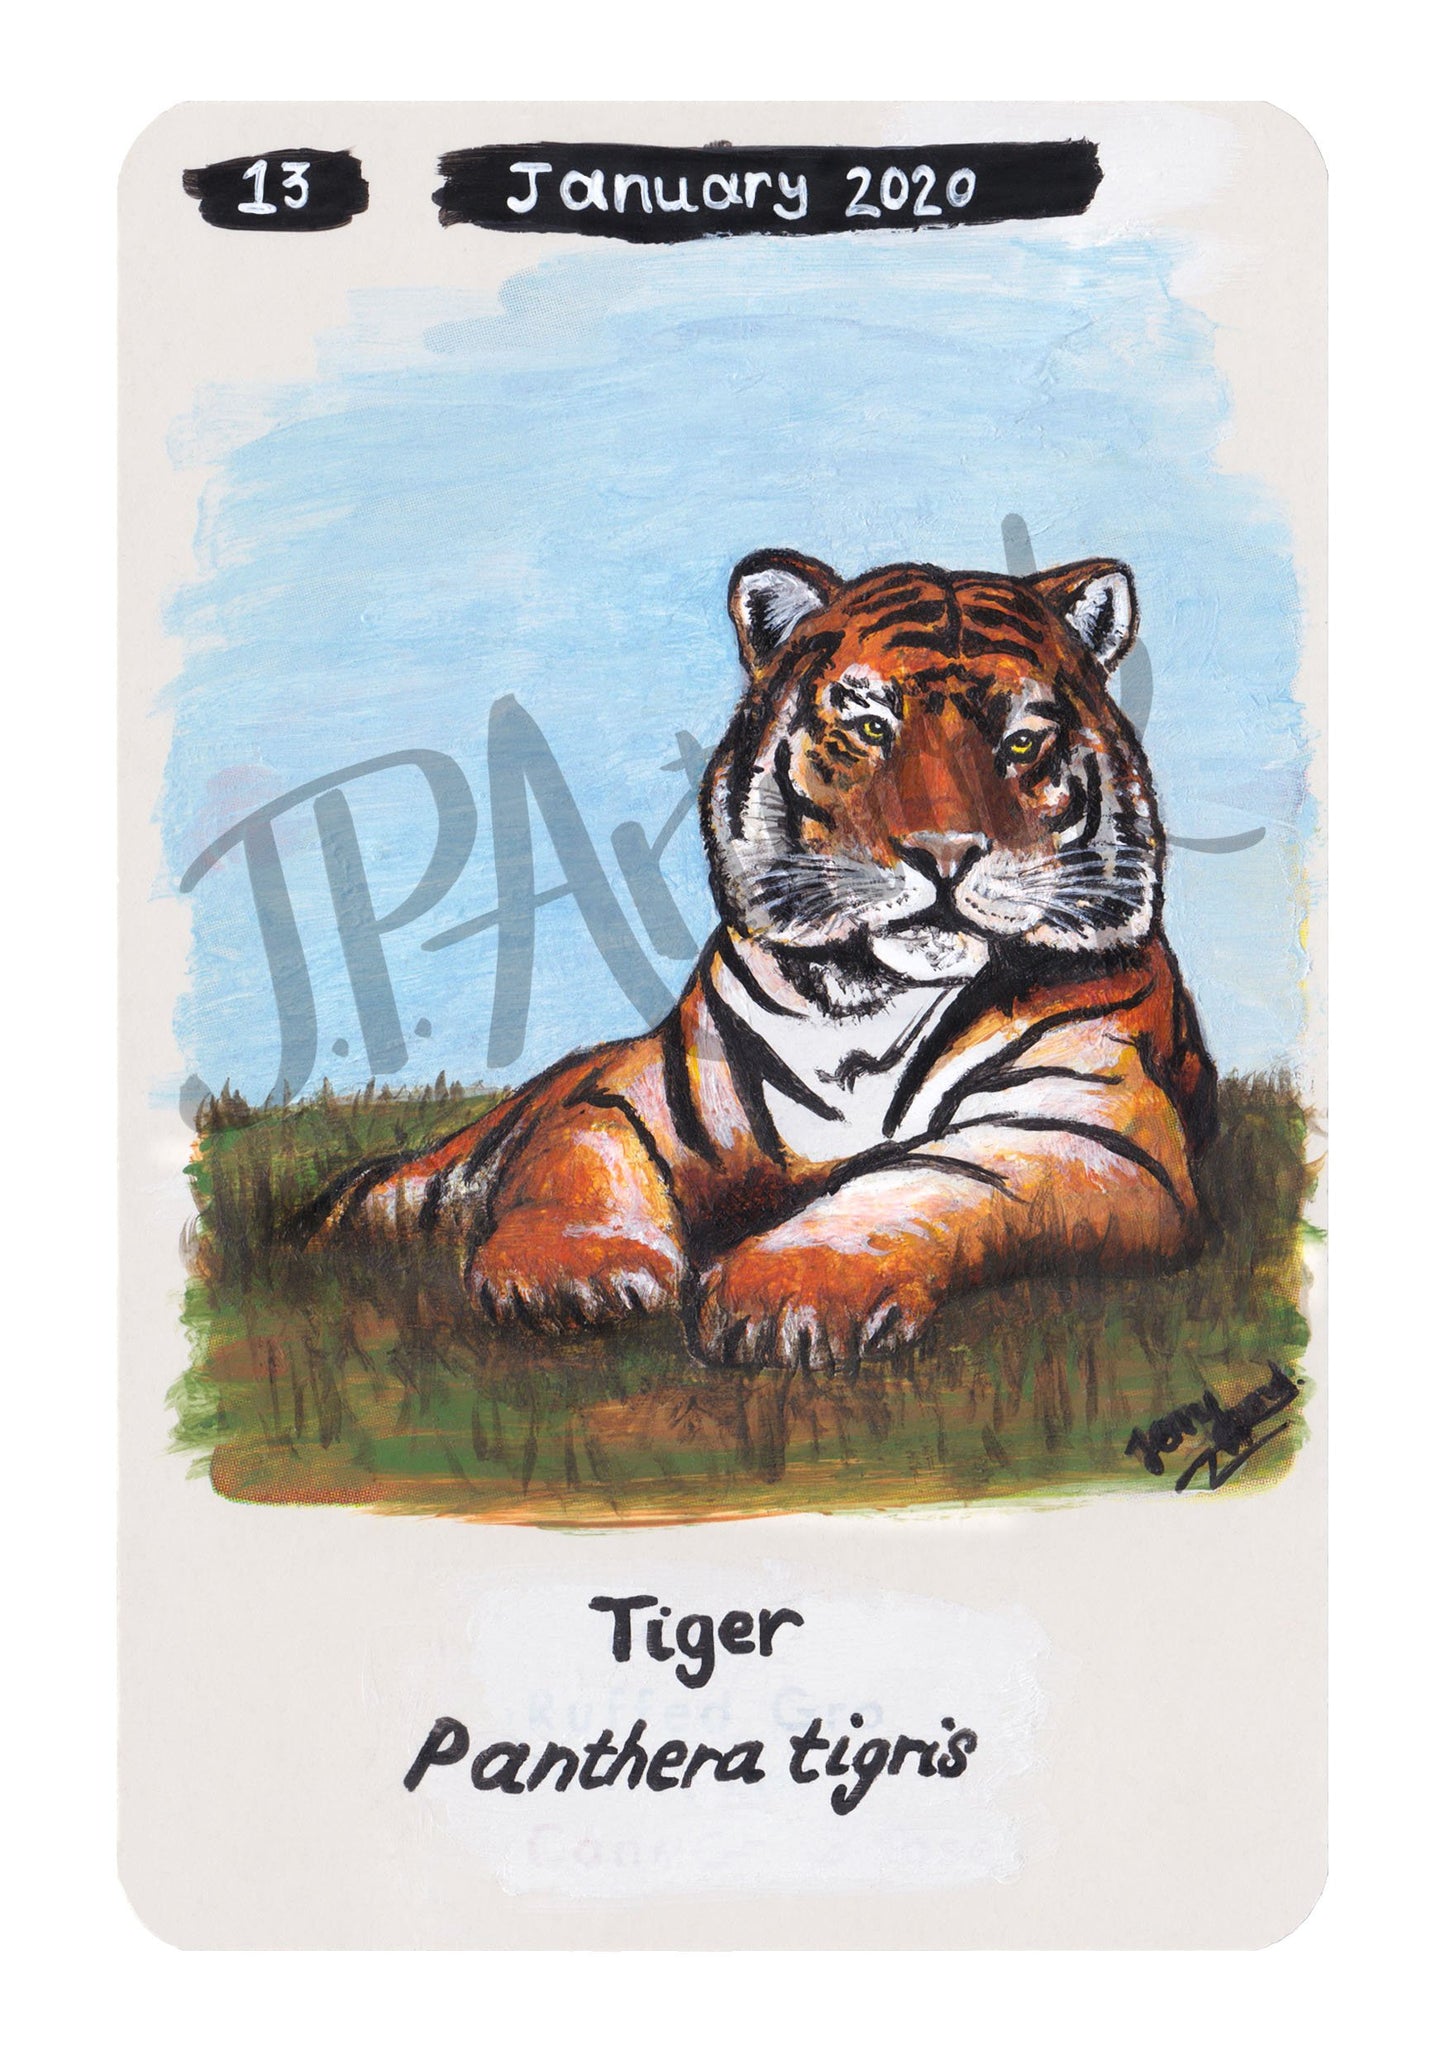 Bengal Tiger Limited Edition A5 Hemp Paper Print by Jenny Pond, JPArtwork